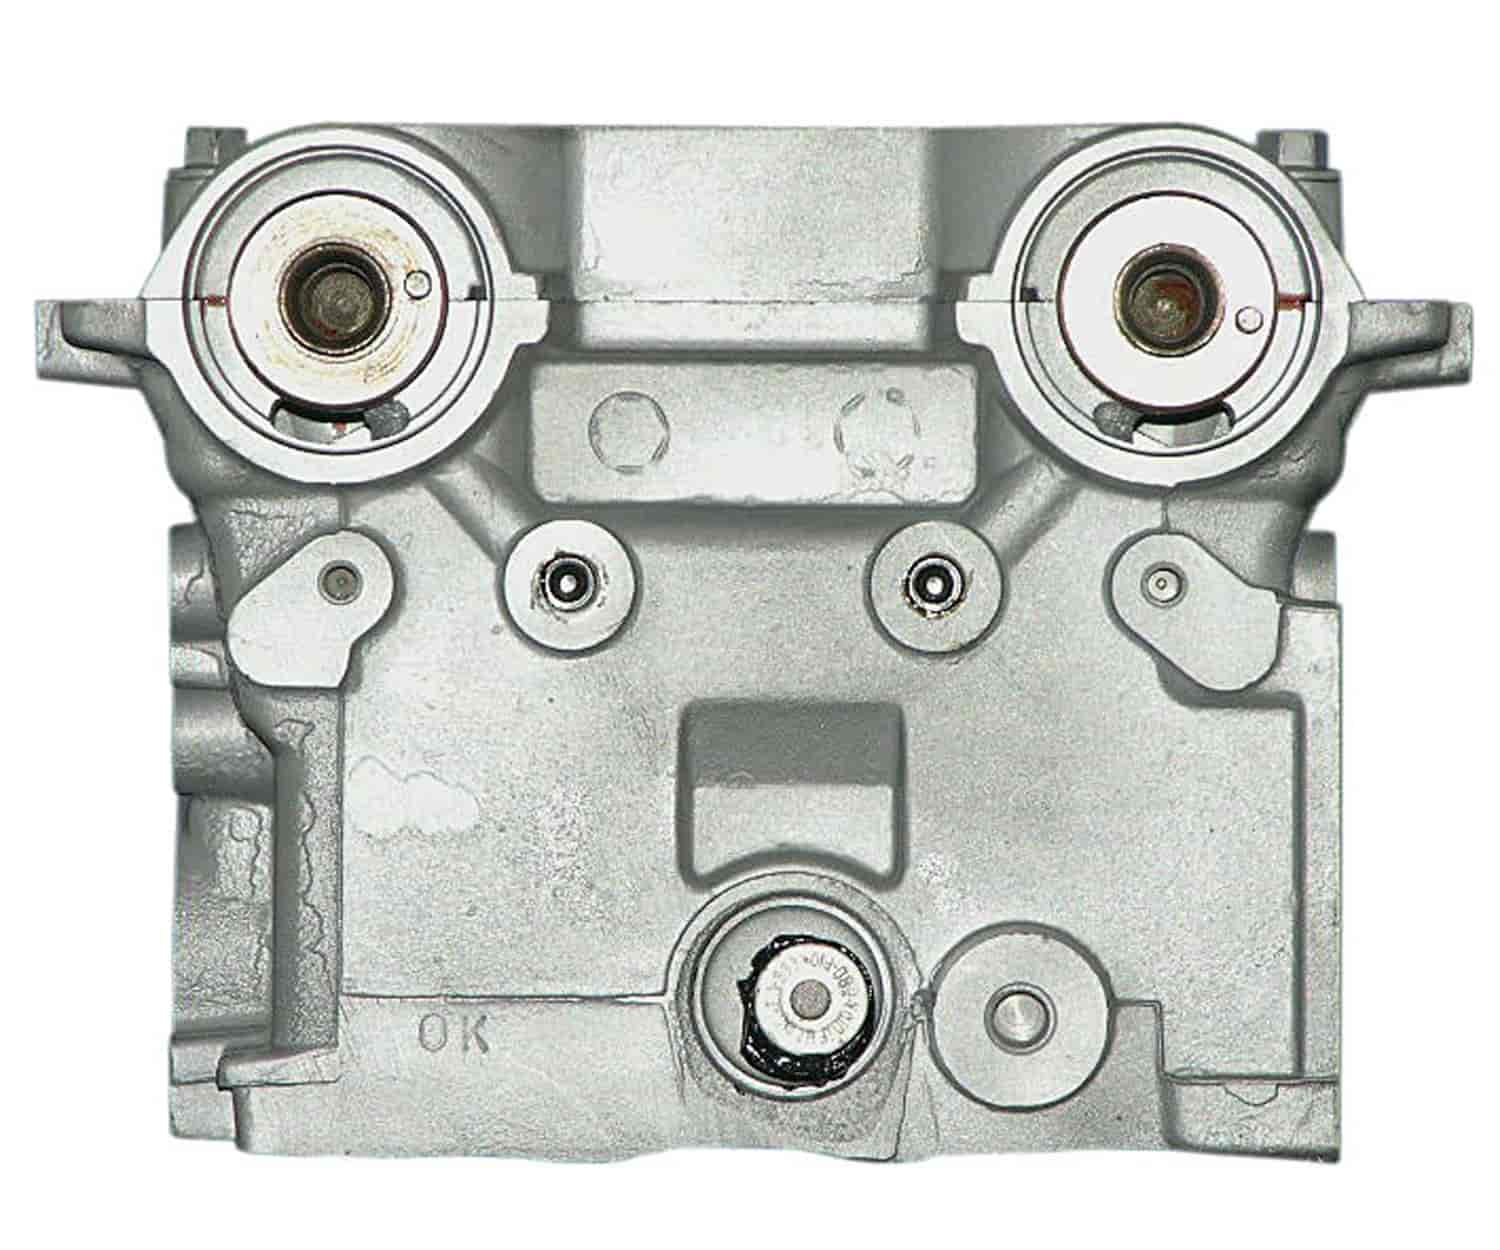 Remanufactured Cylinder Head for 2001 Chrysler/Dodge with 2.4L